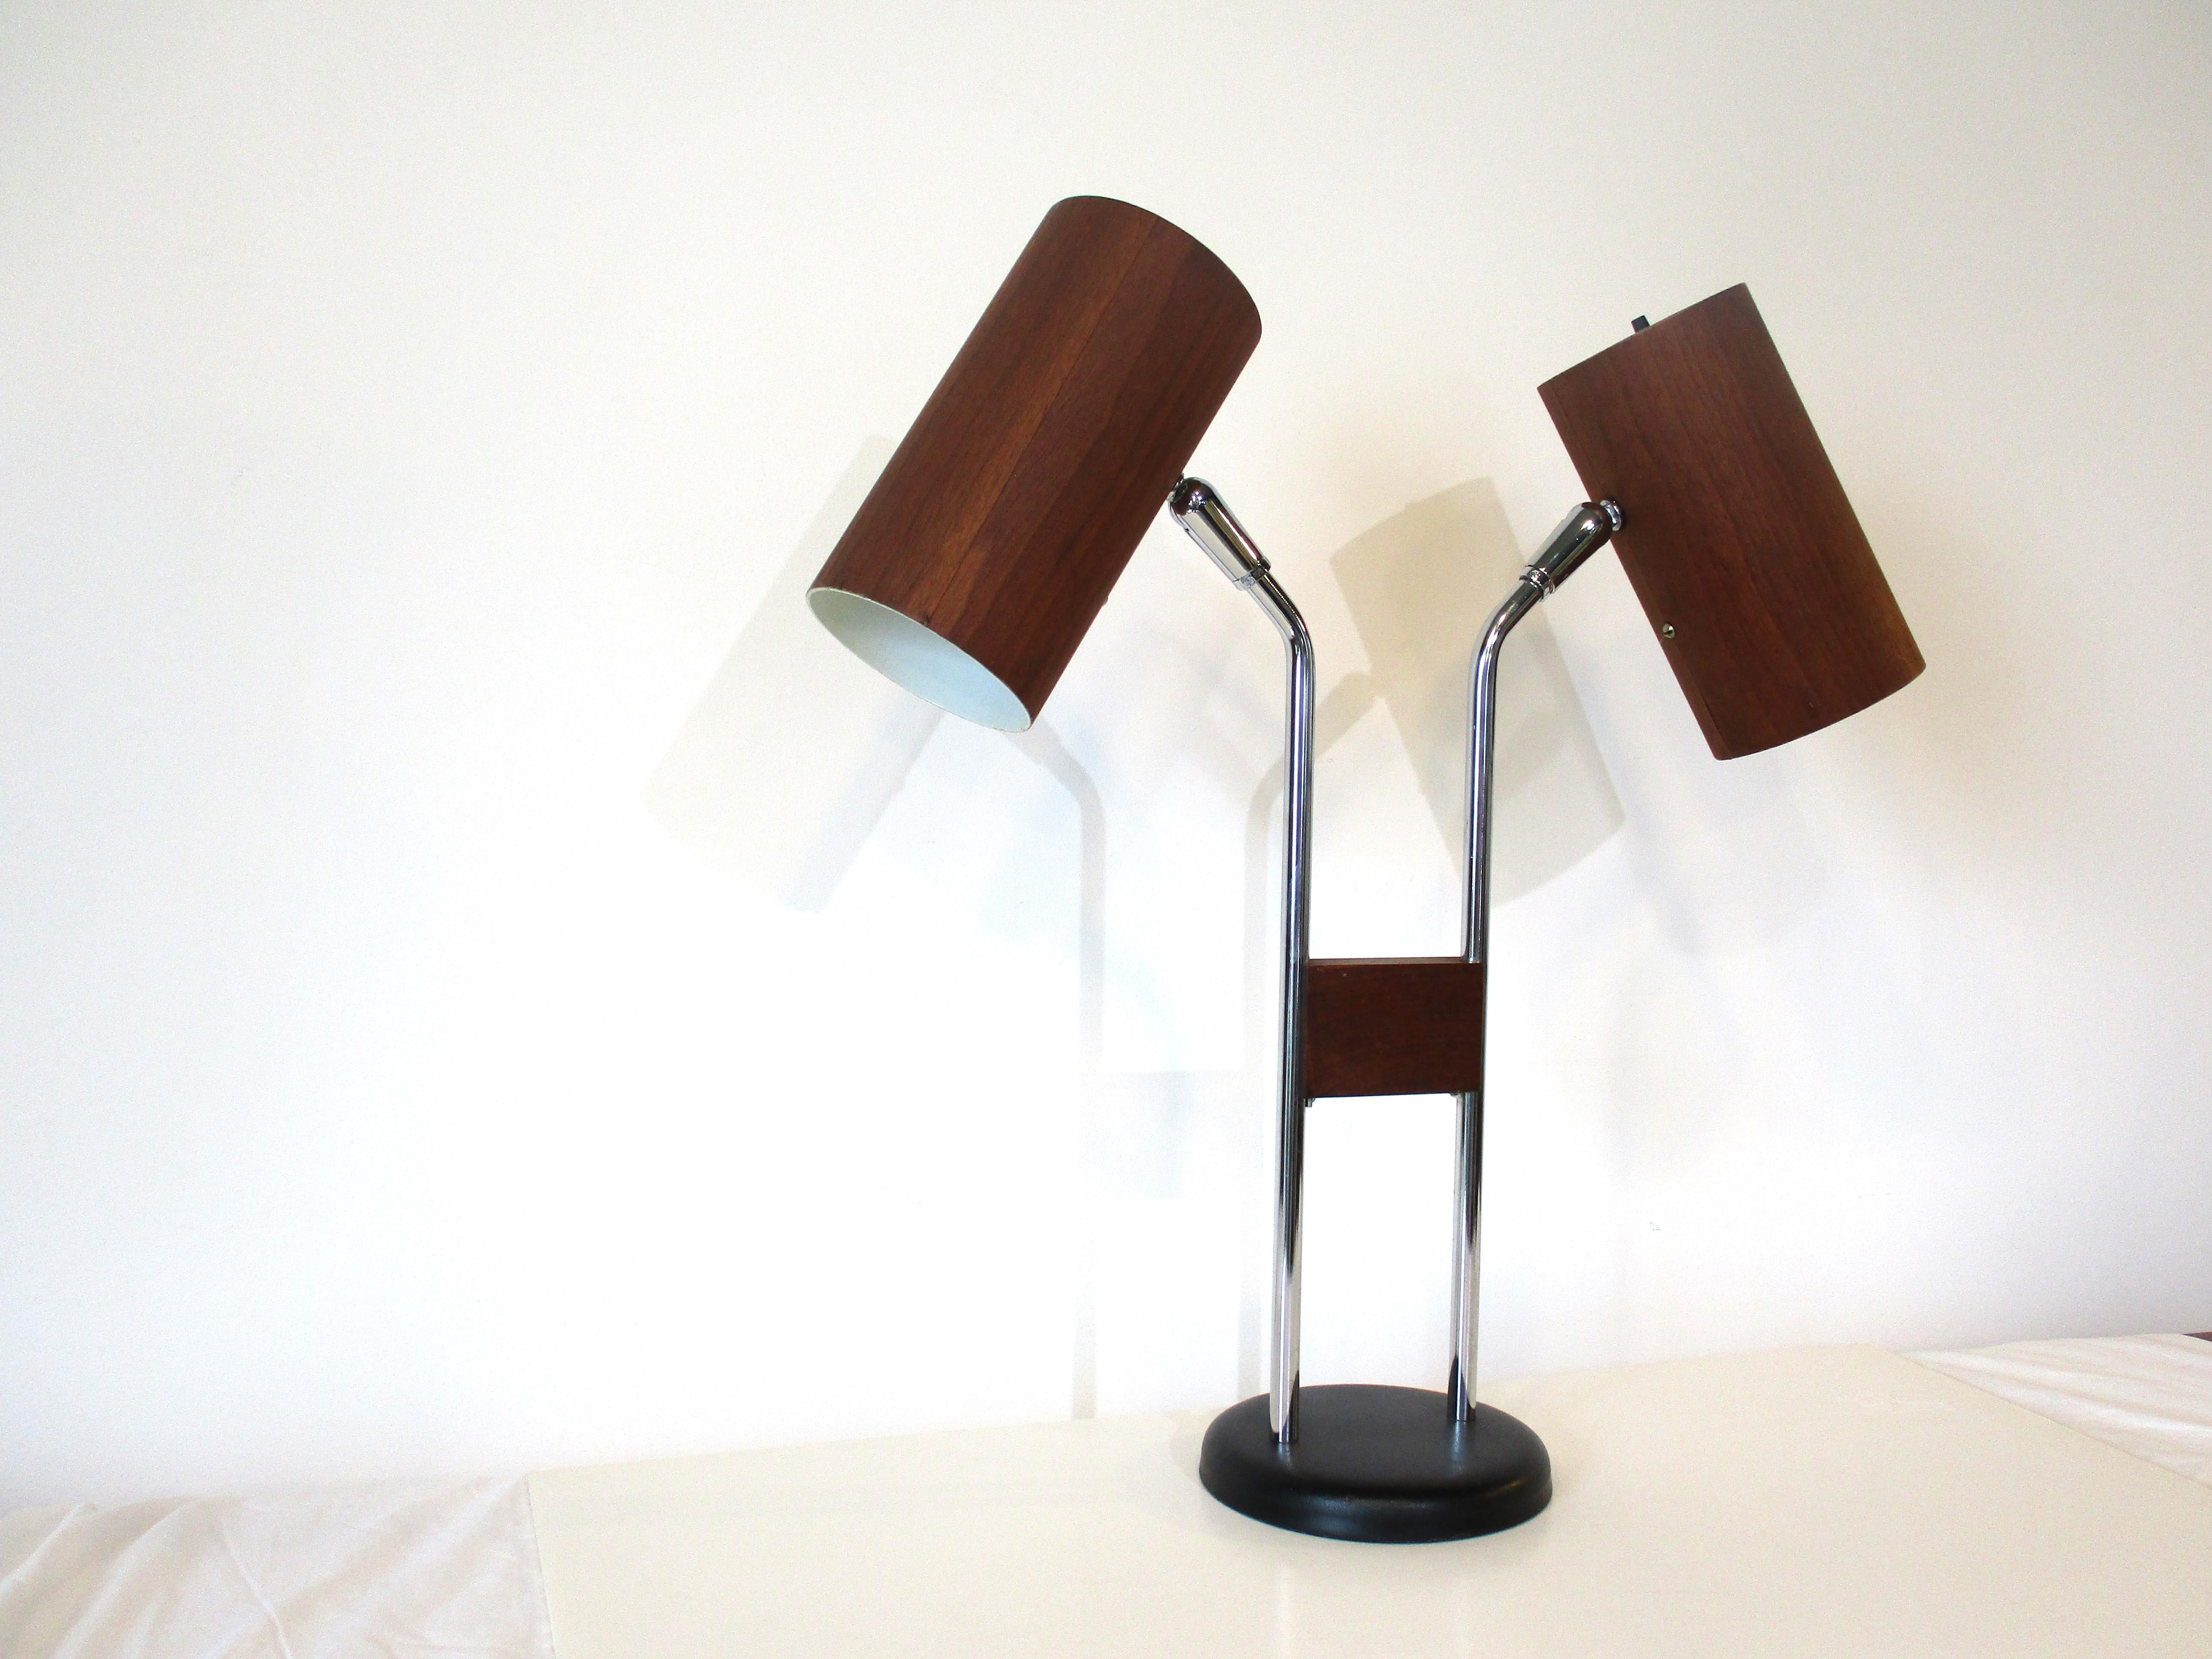 A double headed adjustable table / desk lamp with walnut veneer on both shades . A solid square walnut piece attaches to the center between the chromed poles which are mounted in a satin black steel base . The switches for each light are found on